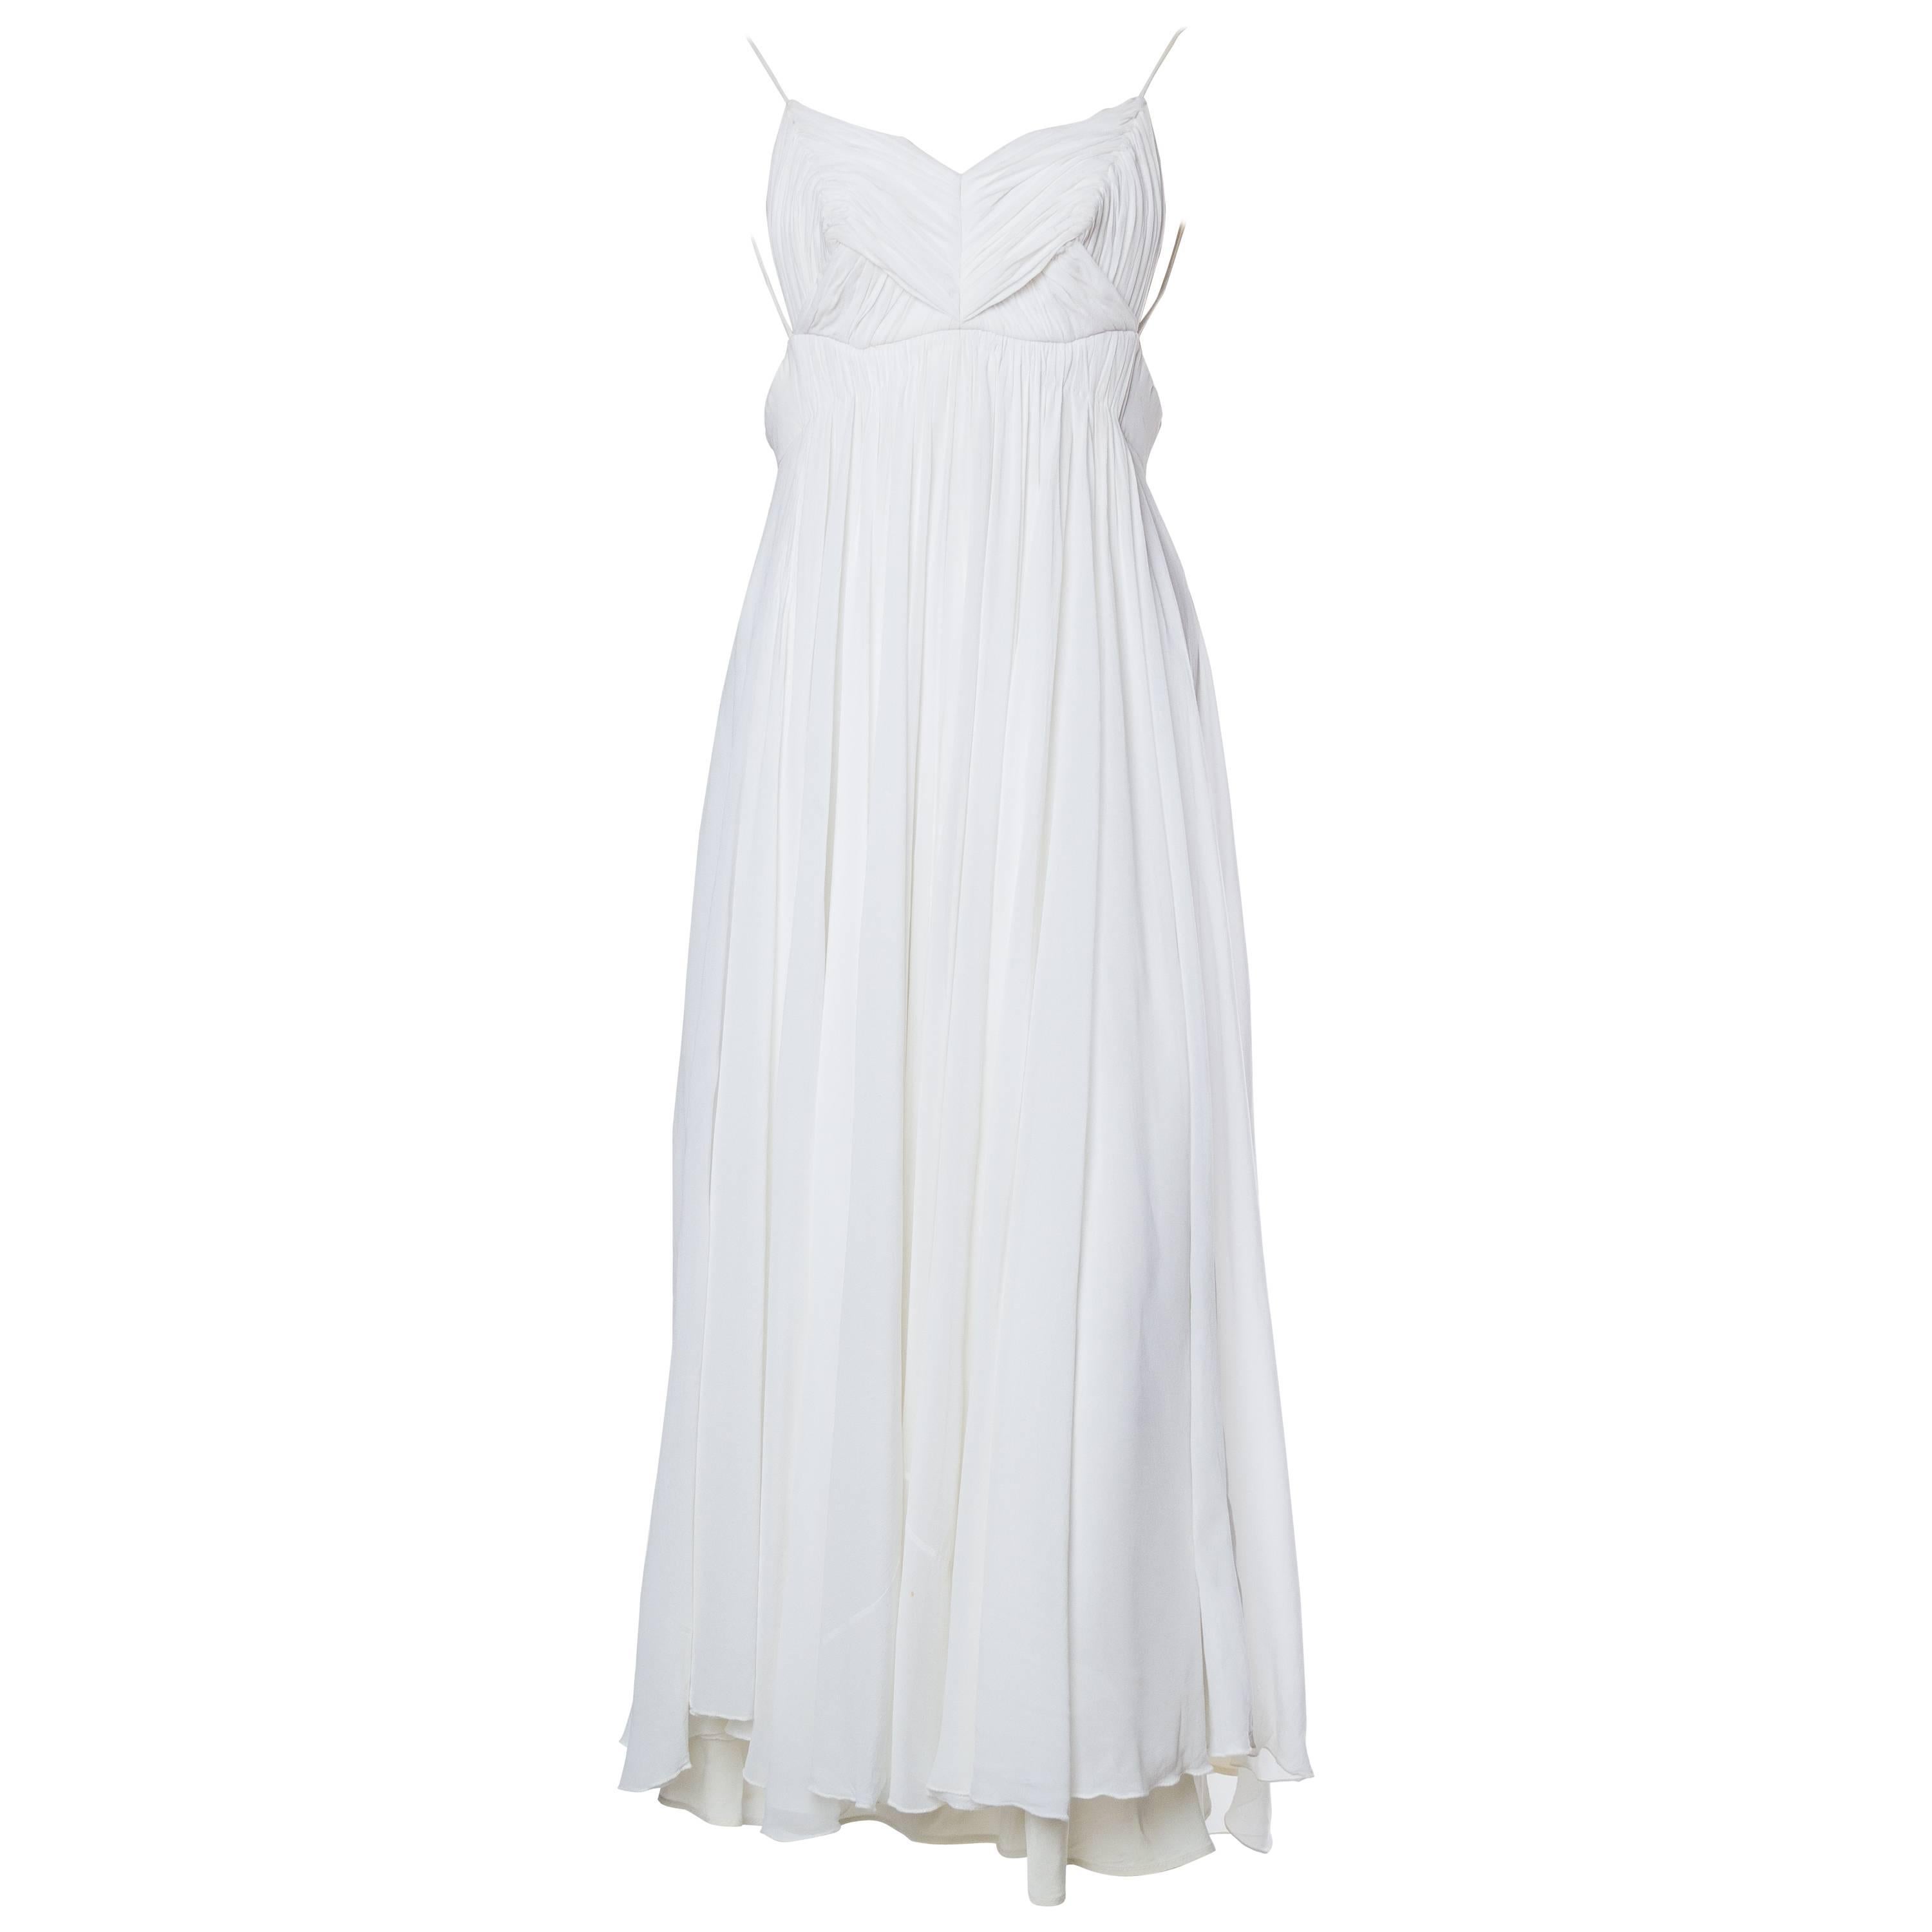 Exquisite Madame Gres Style Pleated Chiffon Dress